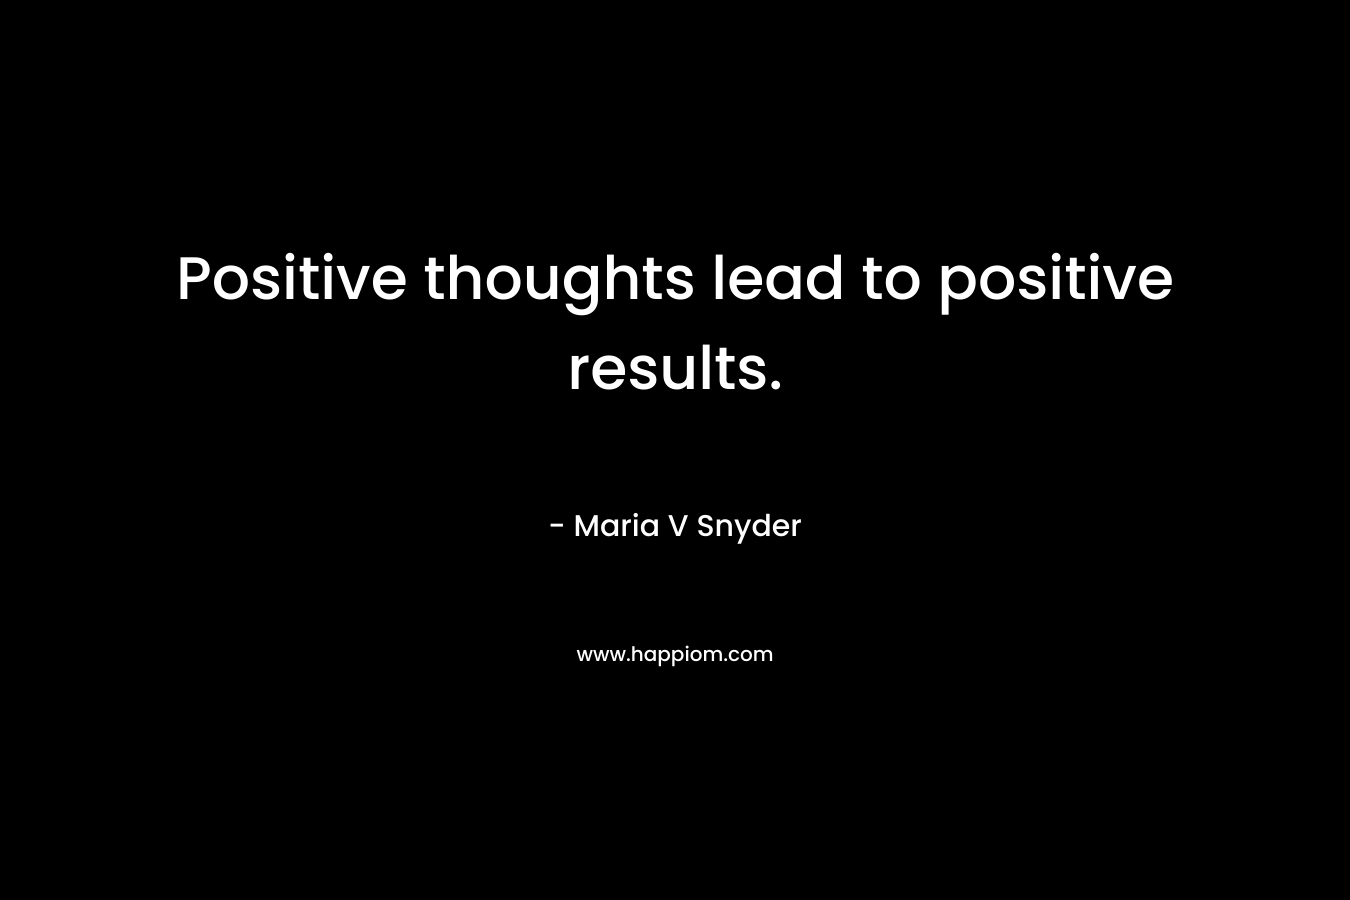 Positive thoughts lead to positive results.